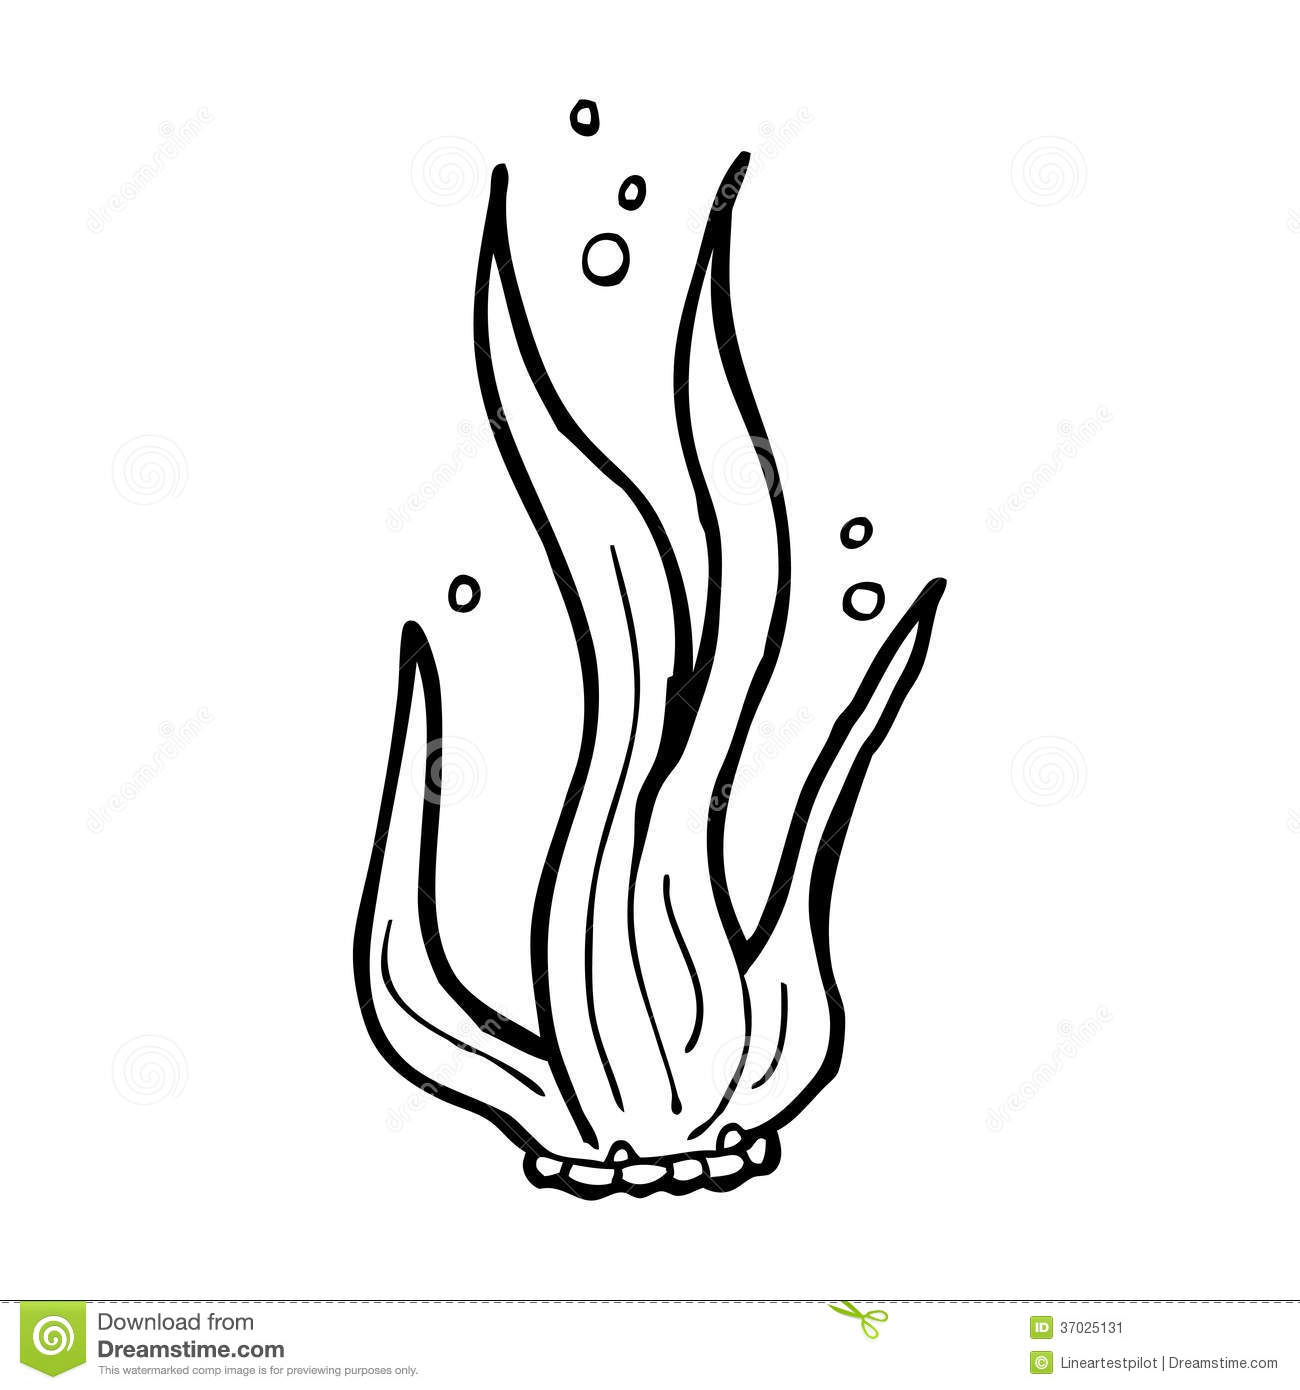 Seaweed Coloring Pages : Seaweed Coloring Pages To Download And Print ...